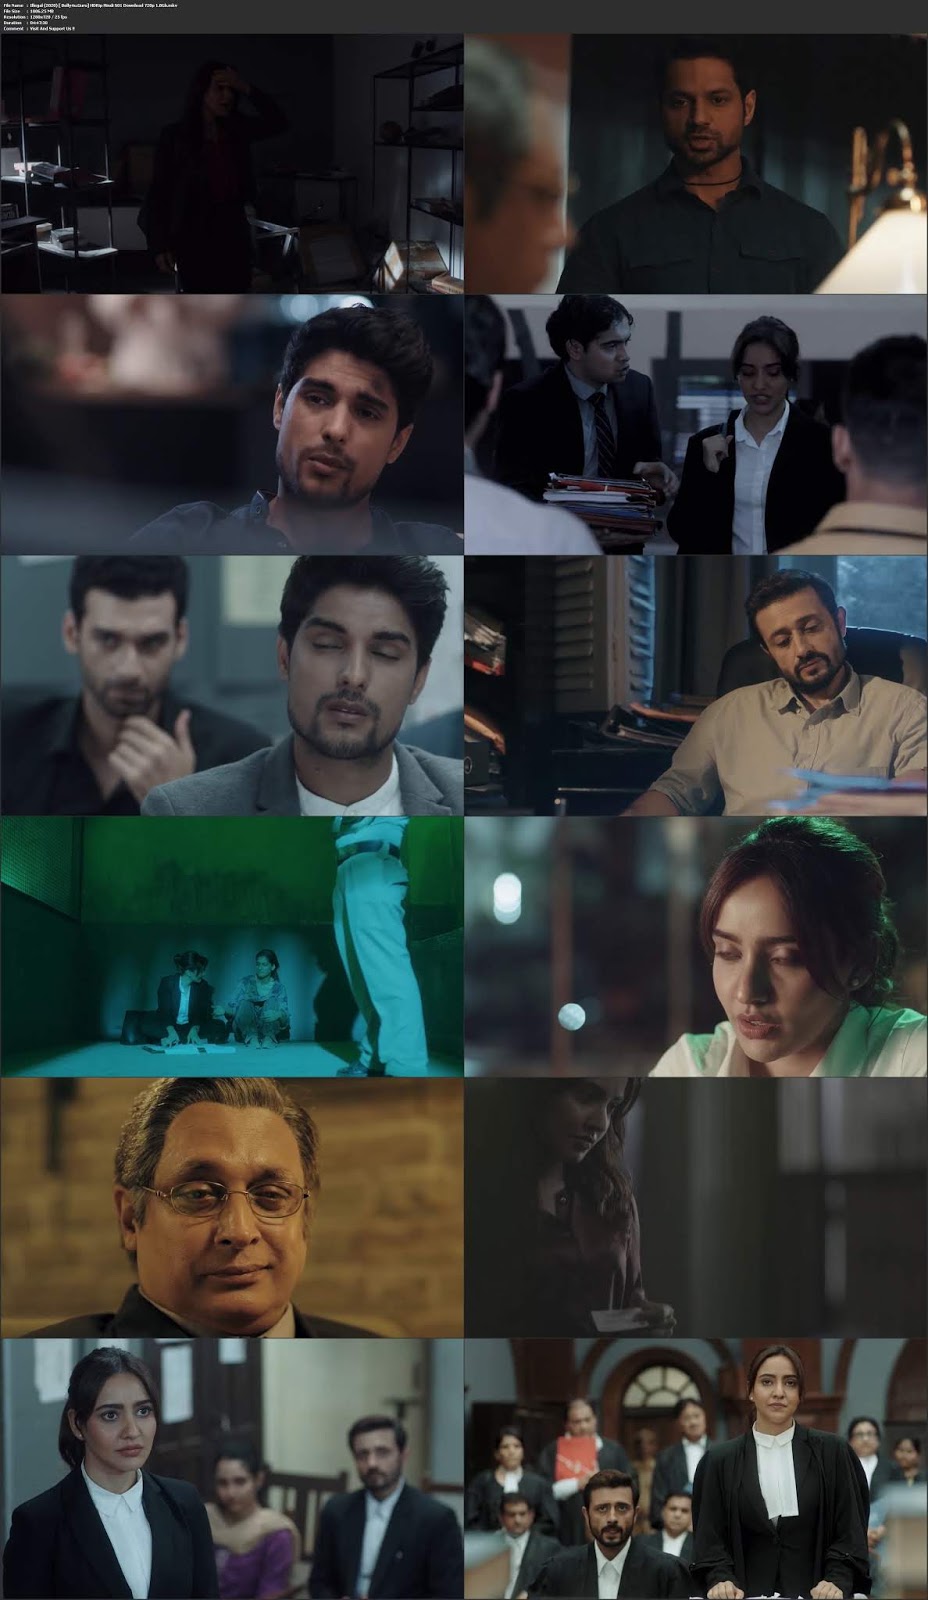 Illegal Justice Out of Order 2020 HDRip 1.8GB Hindi S01 Download 720p